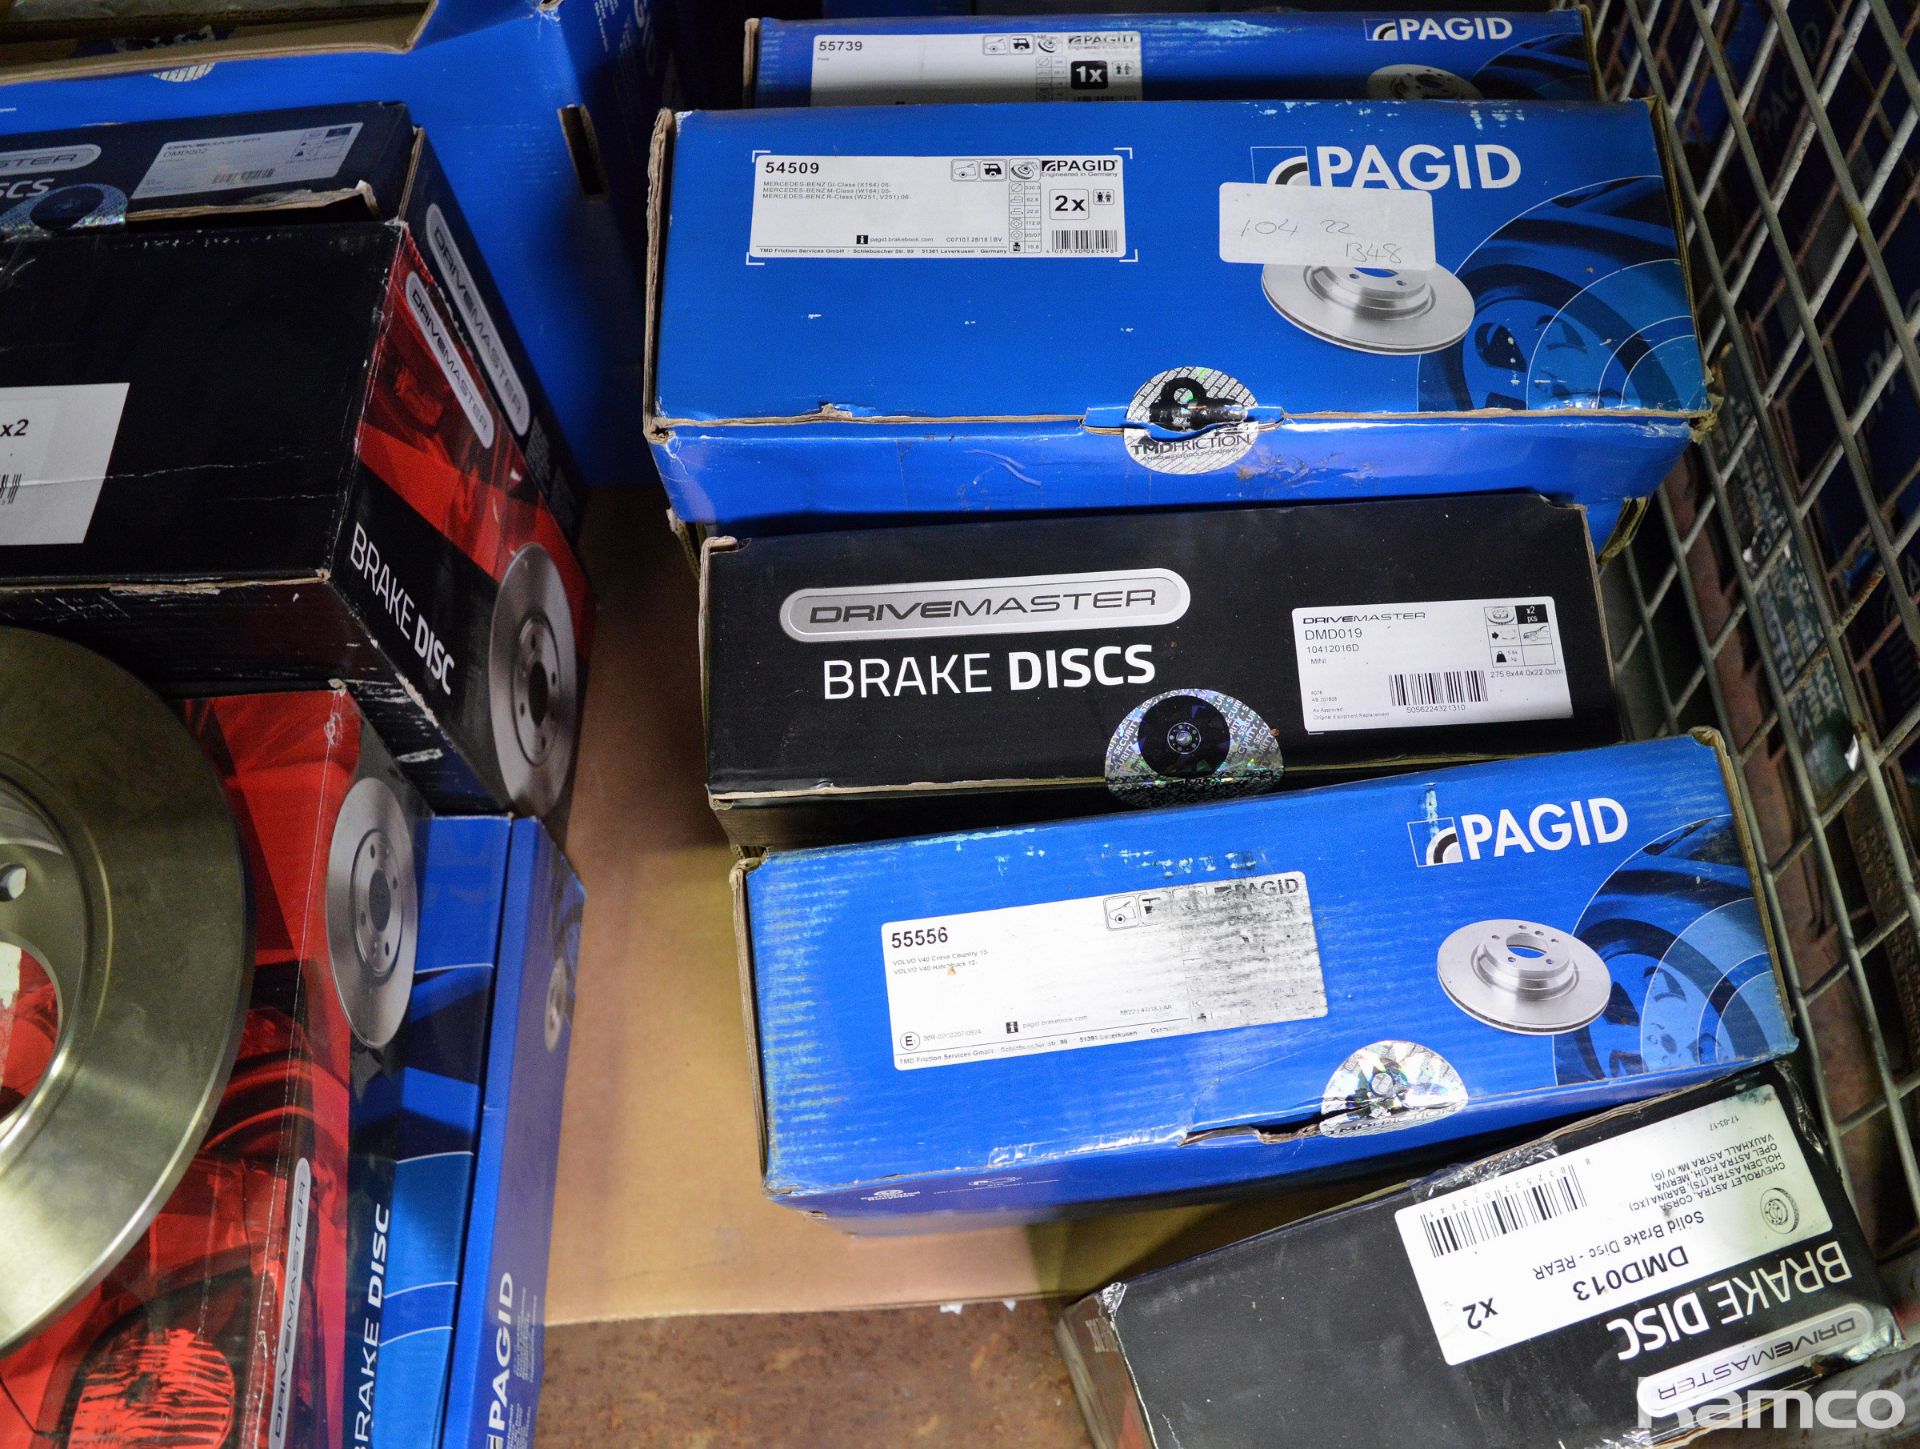 Pagid, Drivemaster, Eicher brake discs - see pictures for model / type - Image 7 of 8